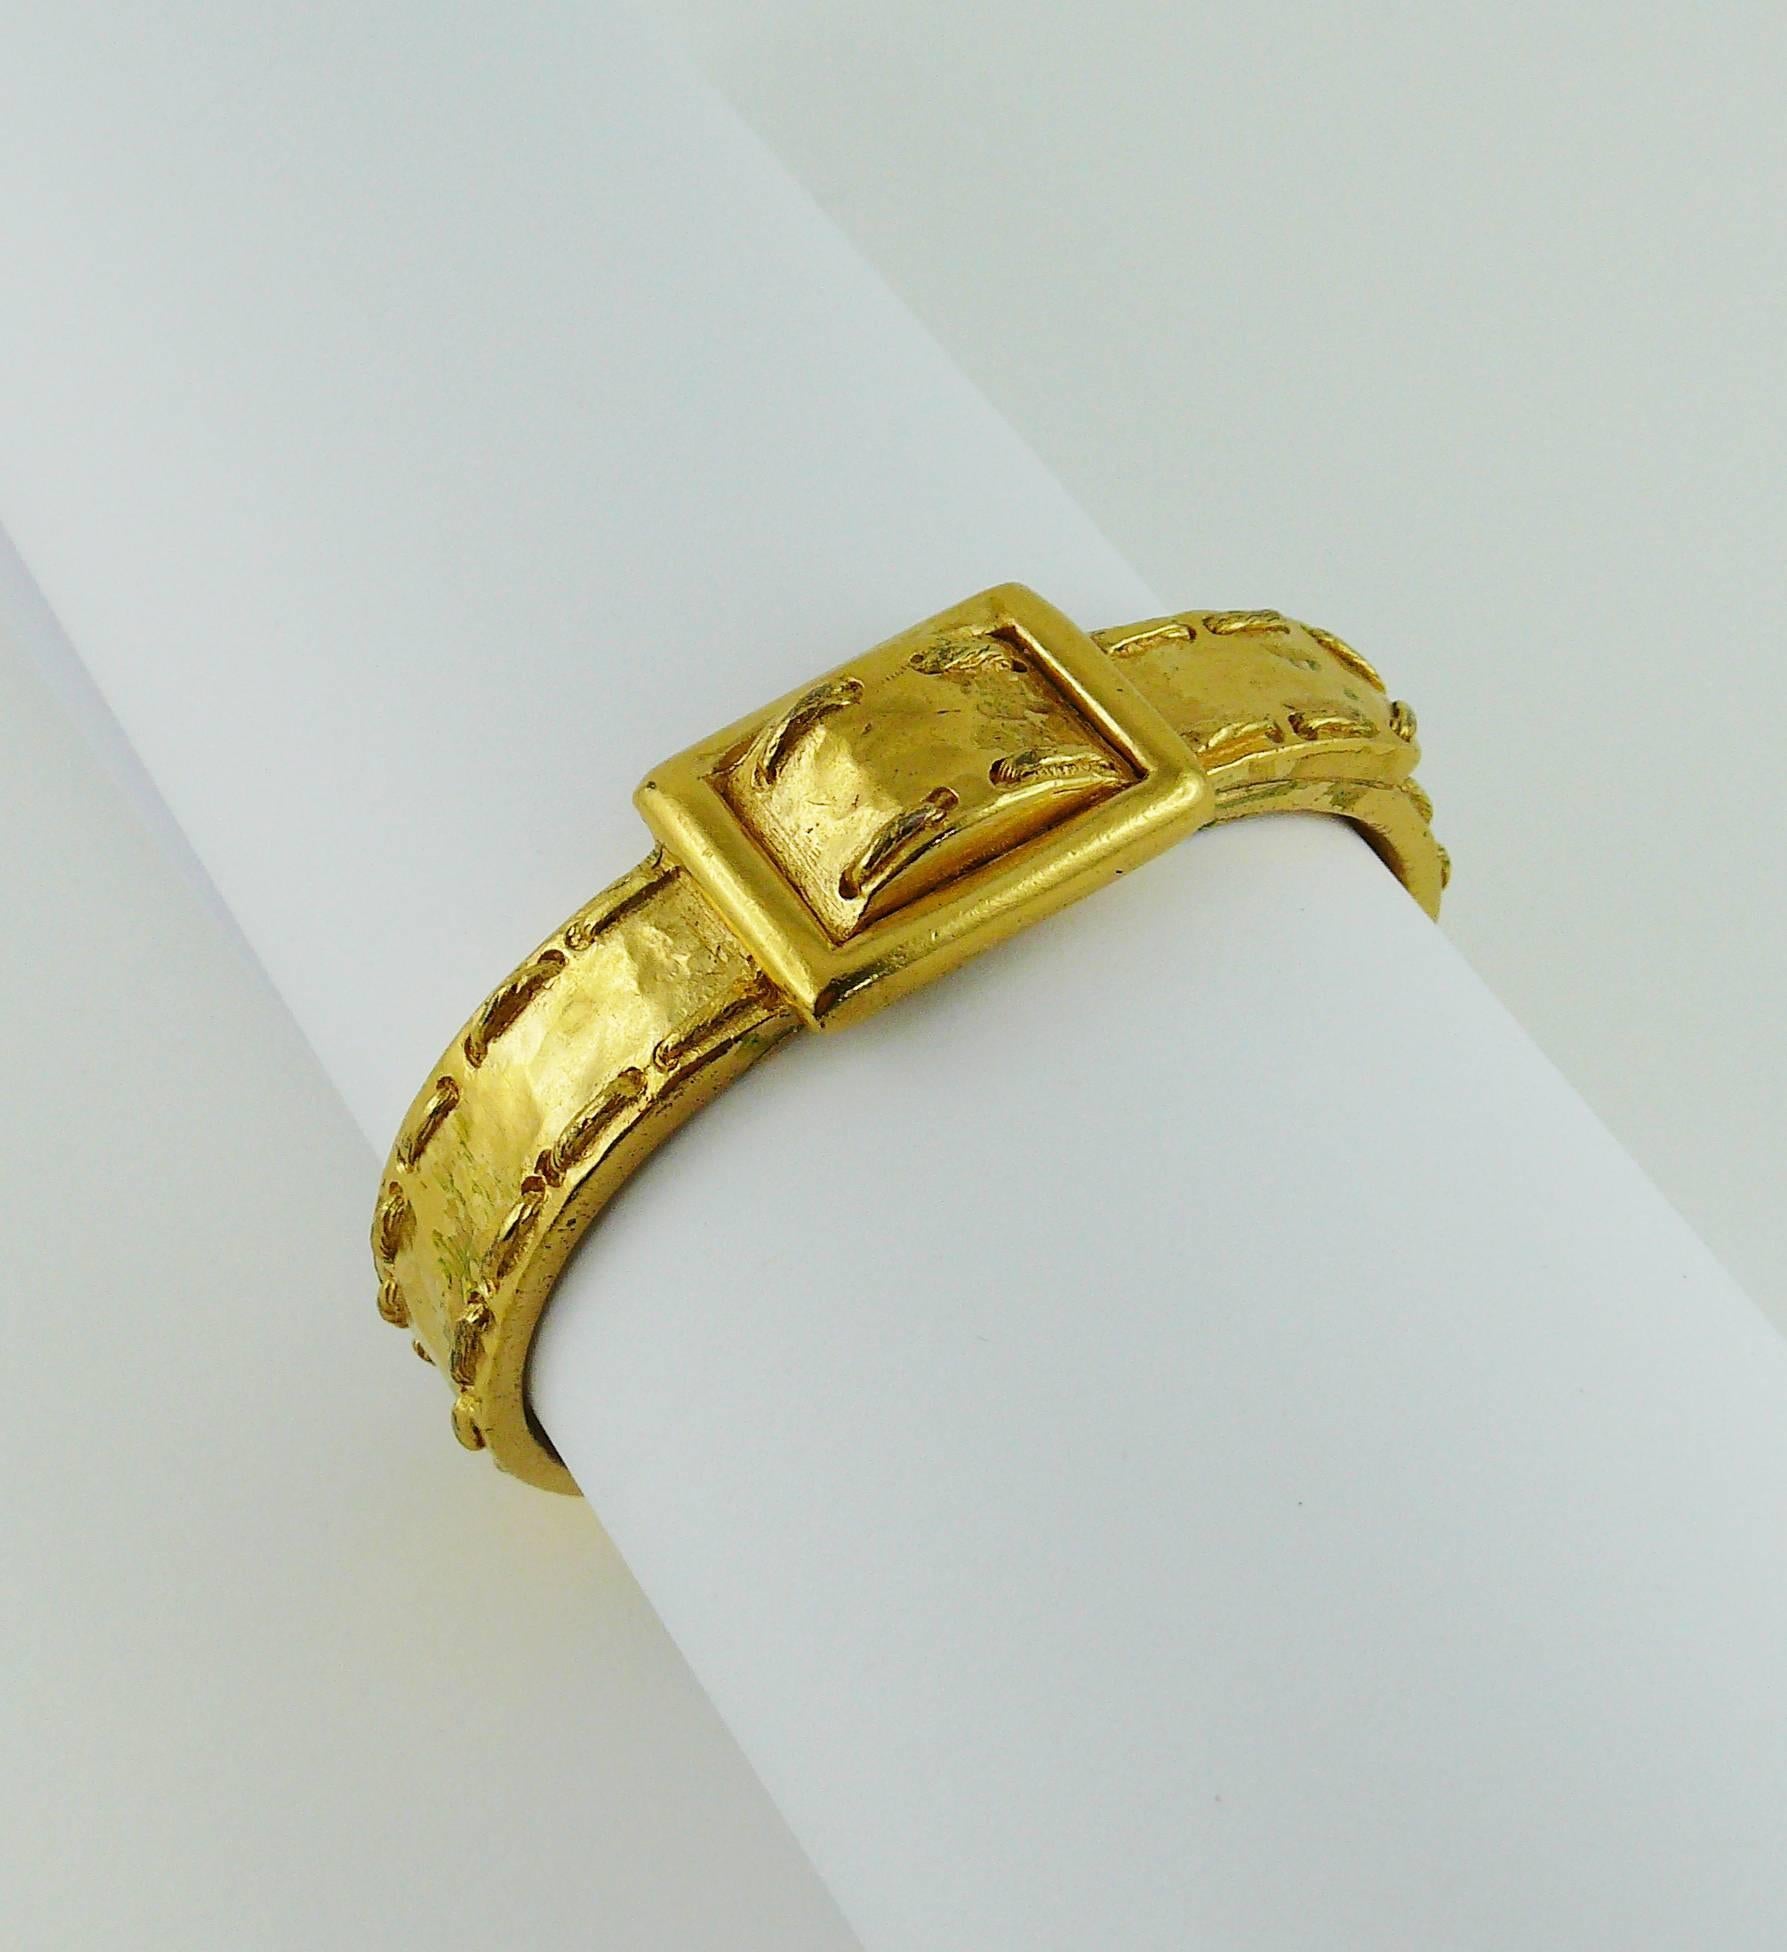 BALENCIAGA vintage gold toned bangle bracelet simulating belt buckle with a gorgeous saddle stitch detail.

Embossed BALENCIAGA Paris Made in France.

Indicative measurements : inside circumference approx. 18.22 cm (7.17 inches)  / width approx. 1.1